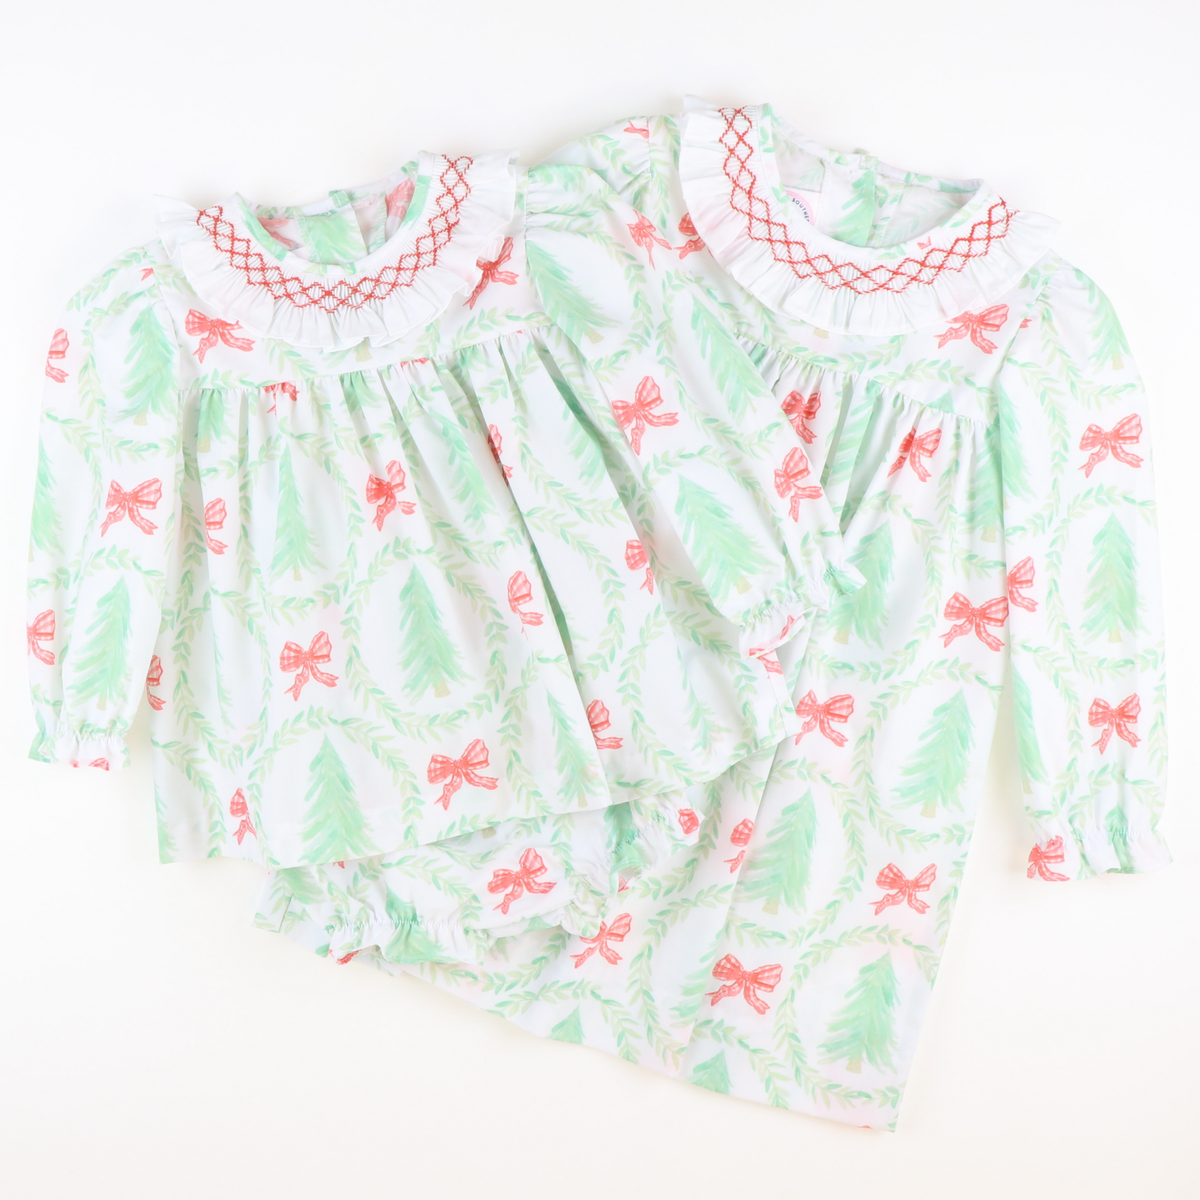 Smocked Heirloom Christmas Trees Ruffle Neck Top & Bloomer Set - Stellybelly